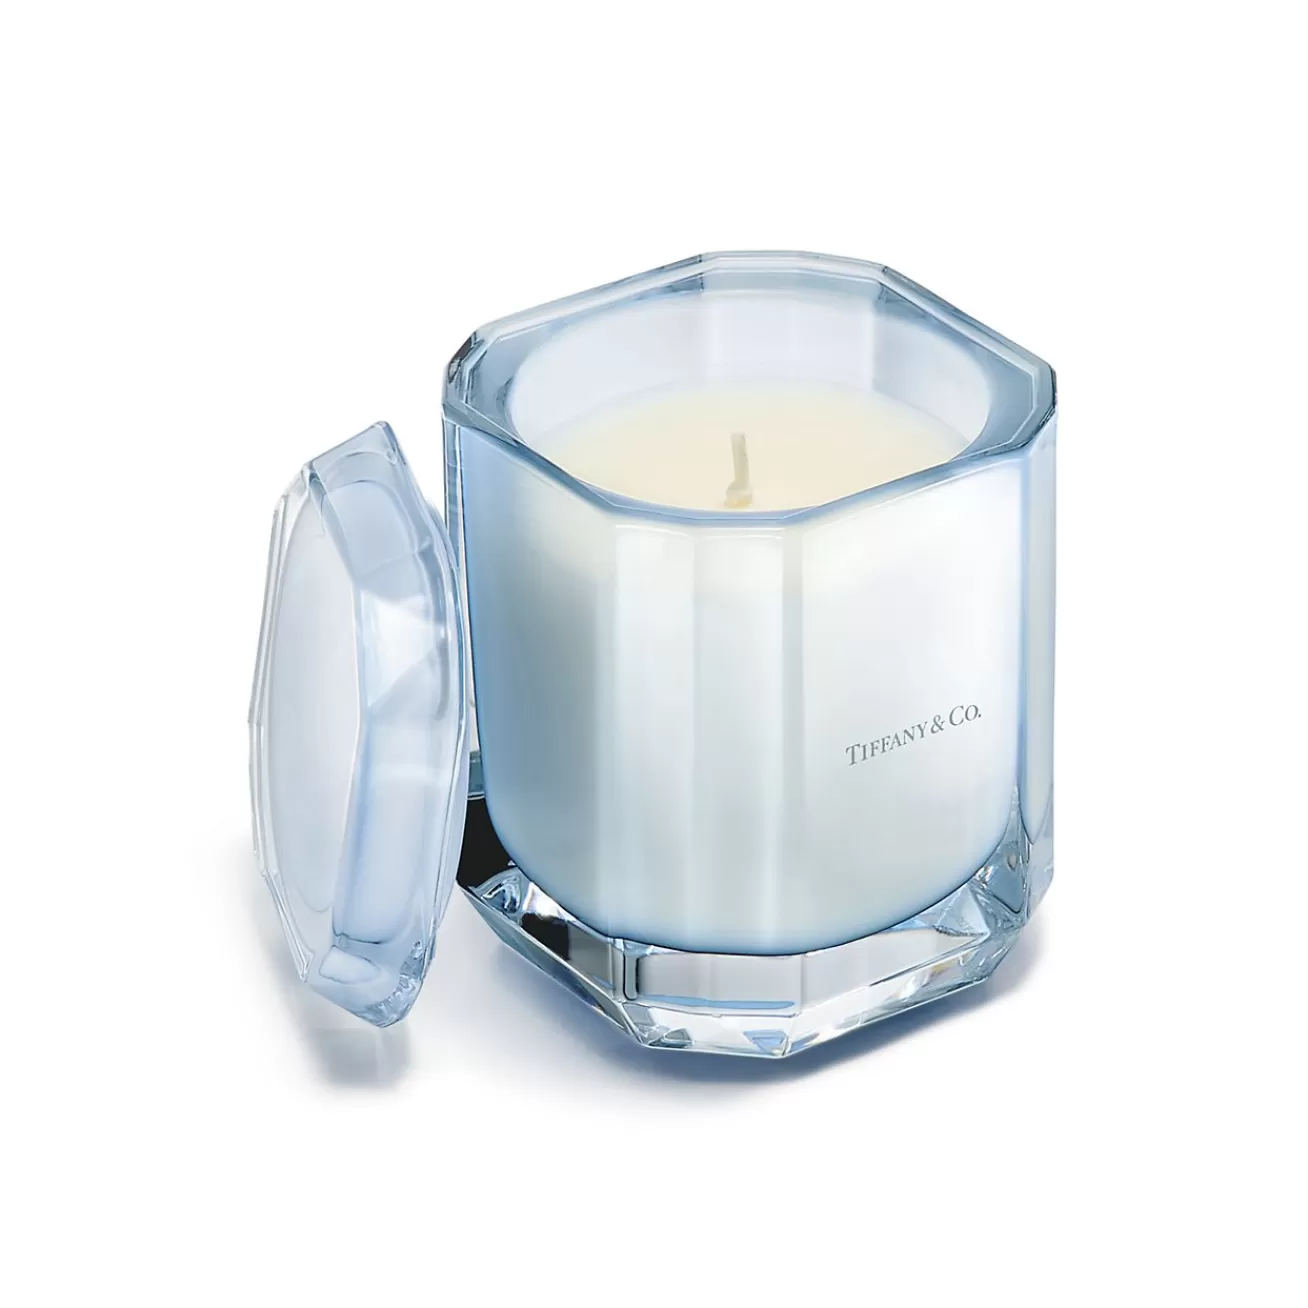 Tiffany & Co. Tiffany Facets Blue is the Color of Love Candle in Tanzanite-colored Glass | ^ The Home | Housewarming Gifts